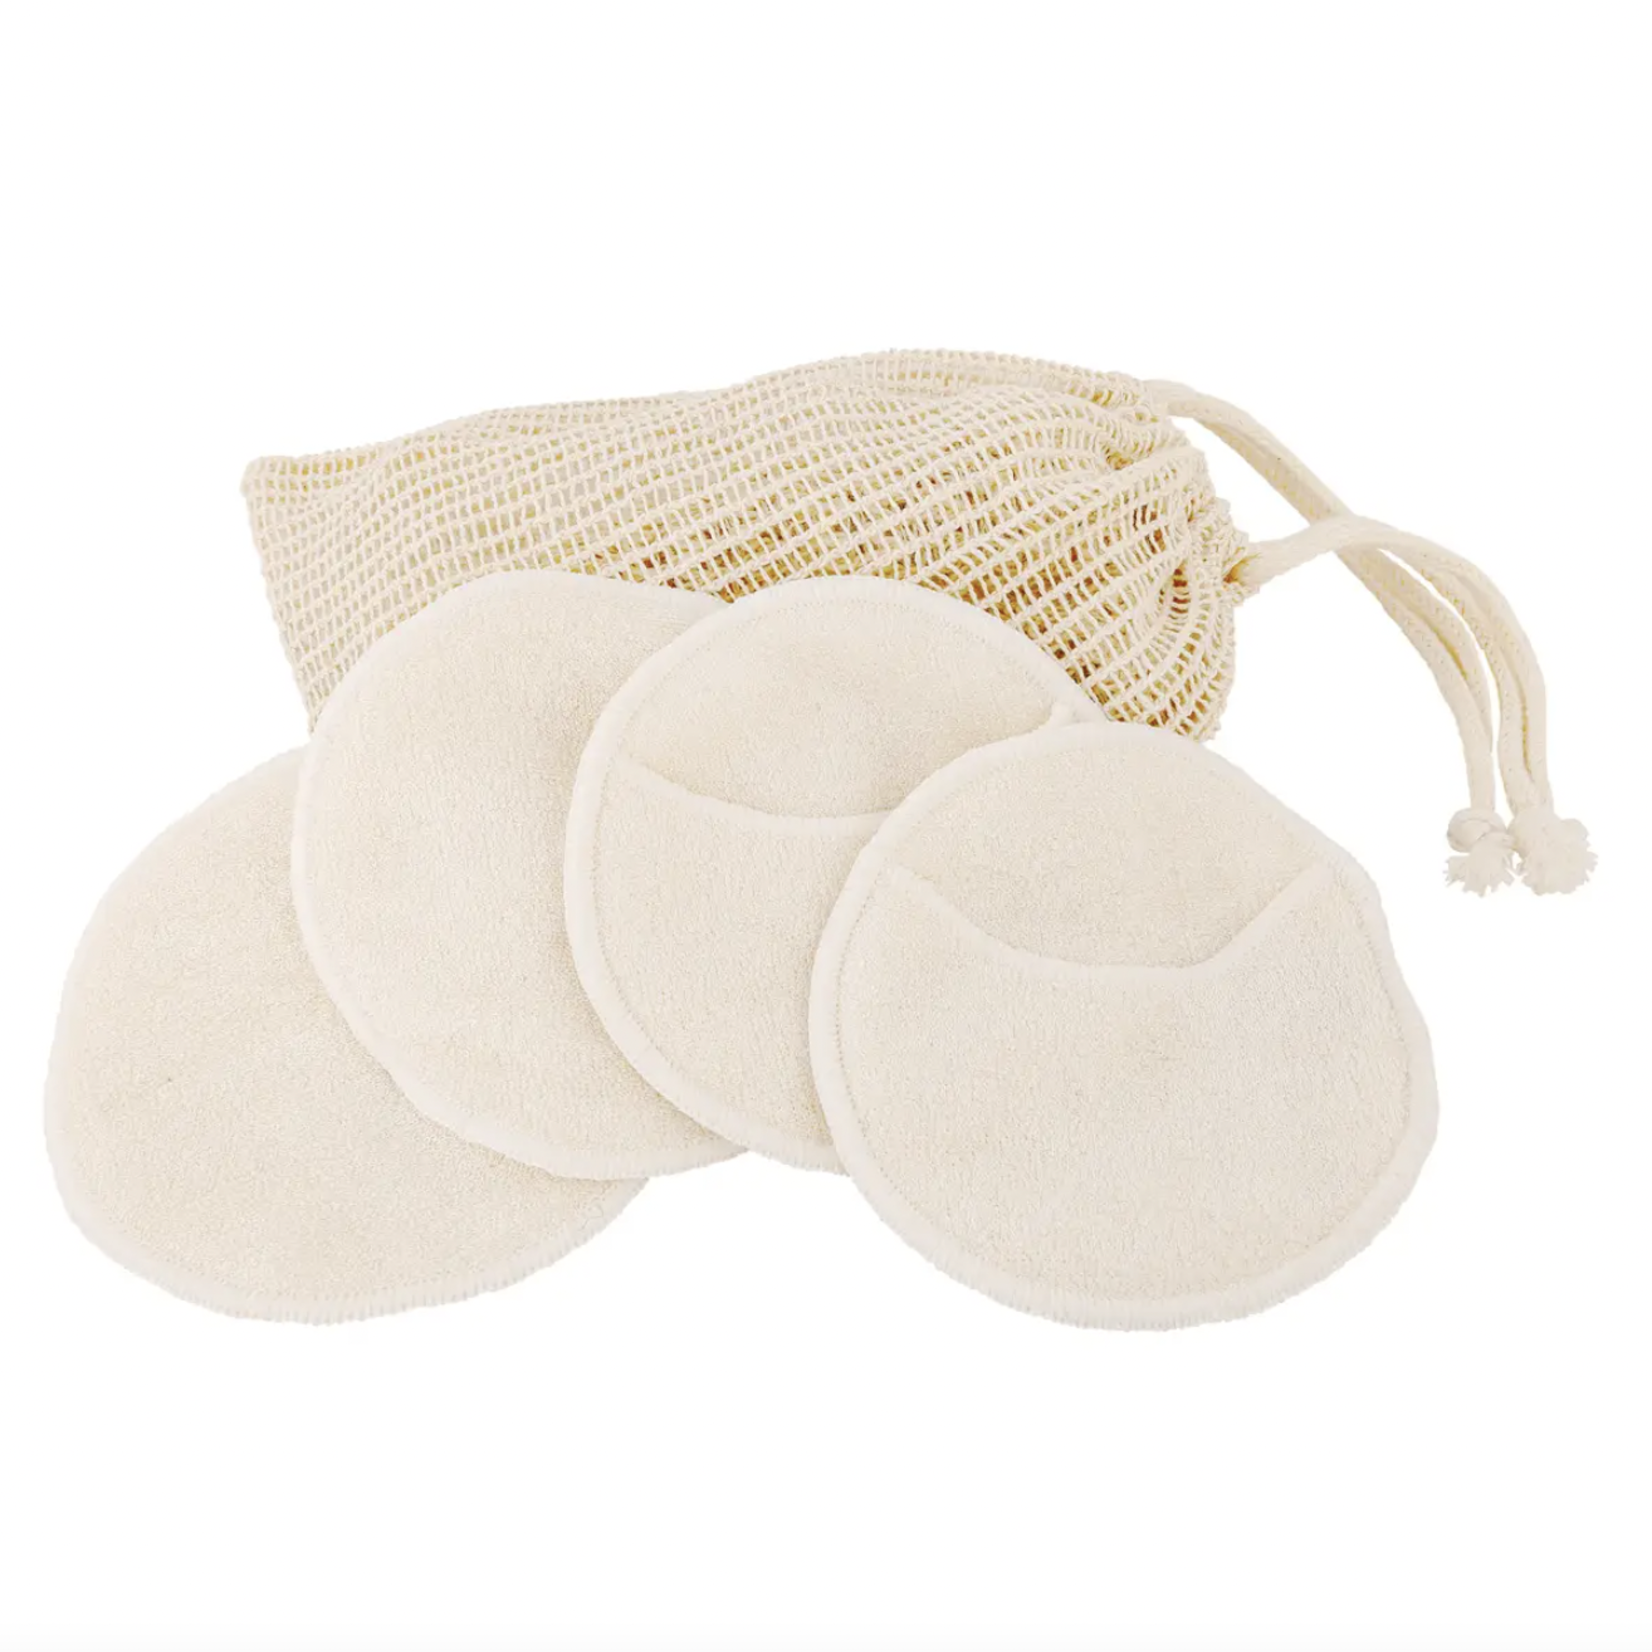 Croll & Denecke Bamboo & Cotton Cleansing Pads